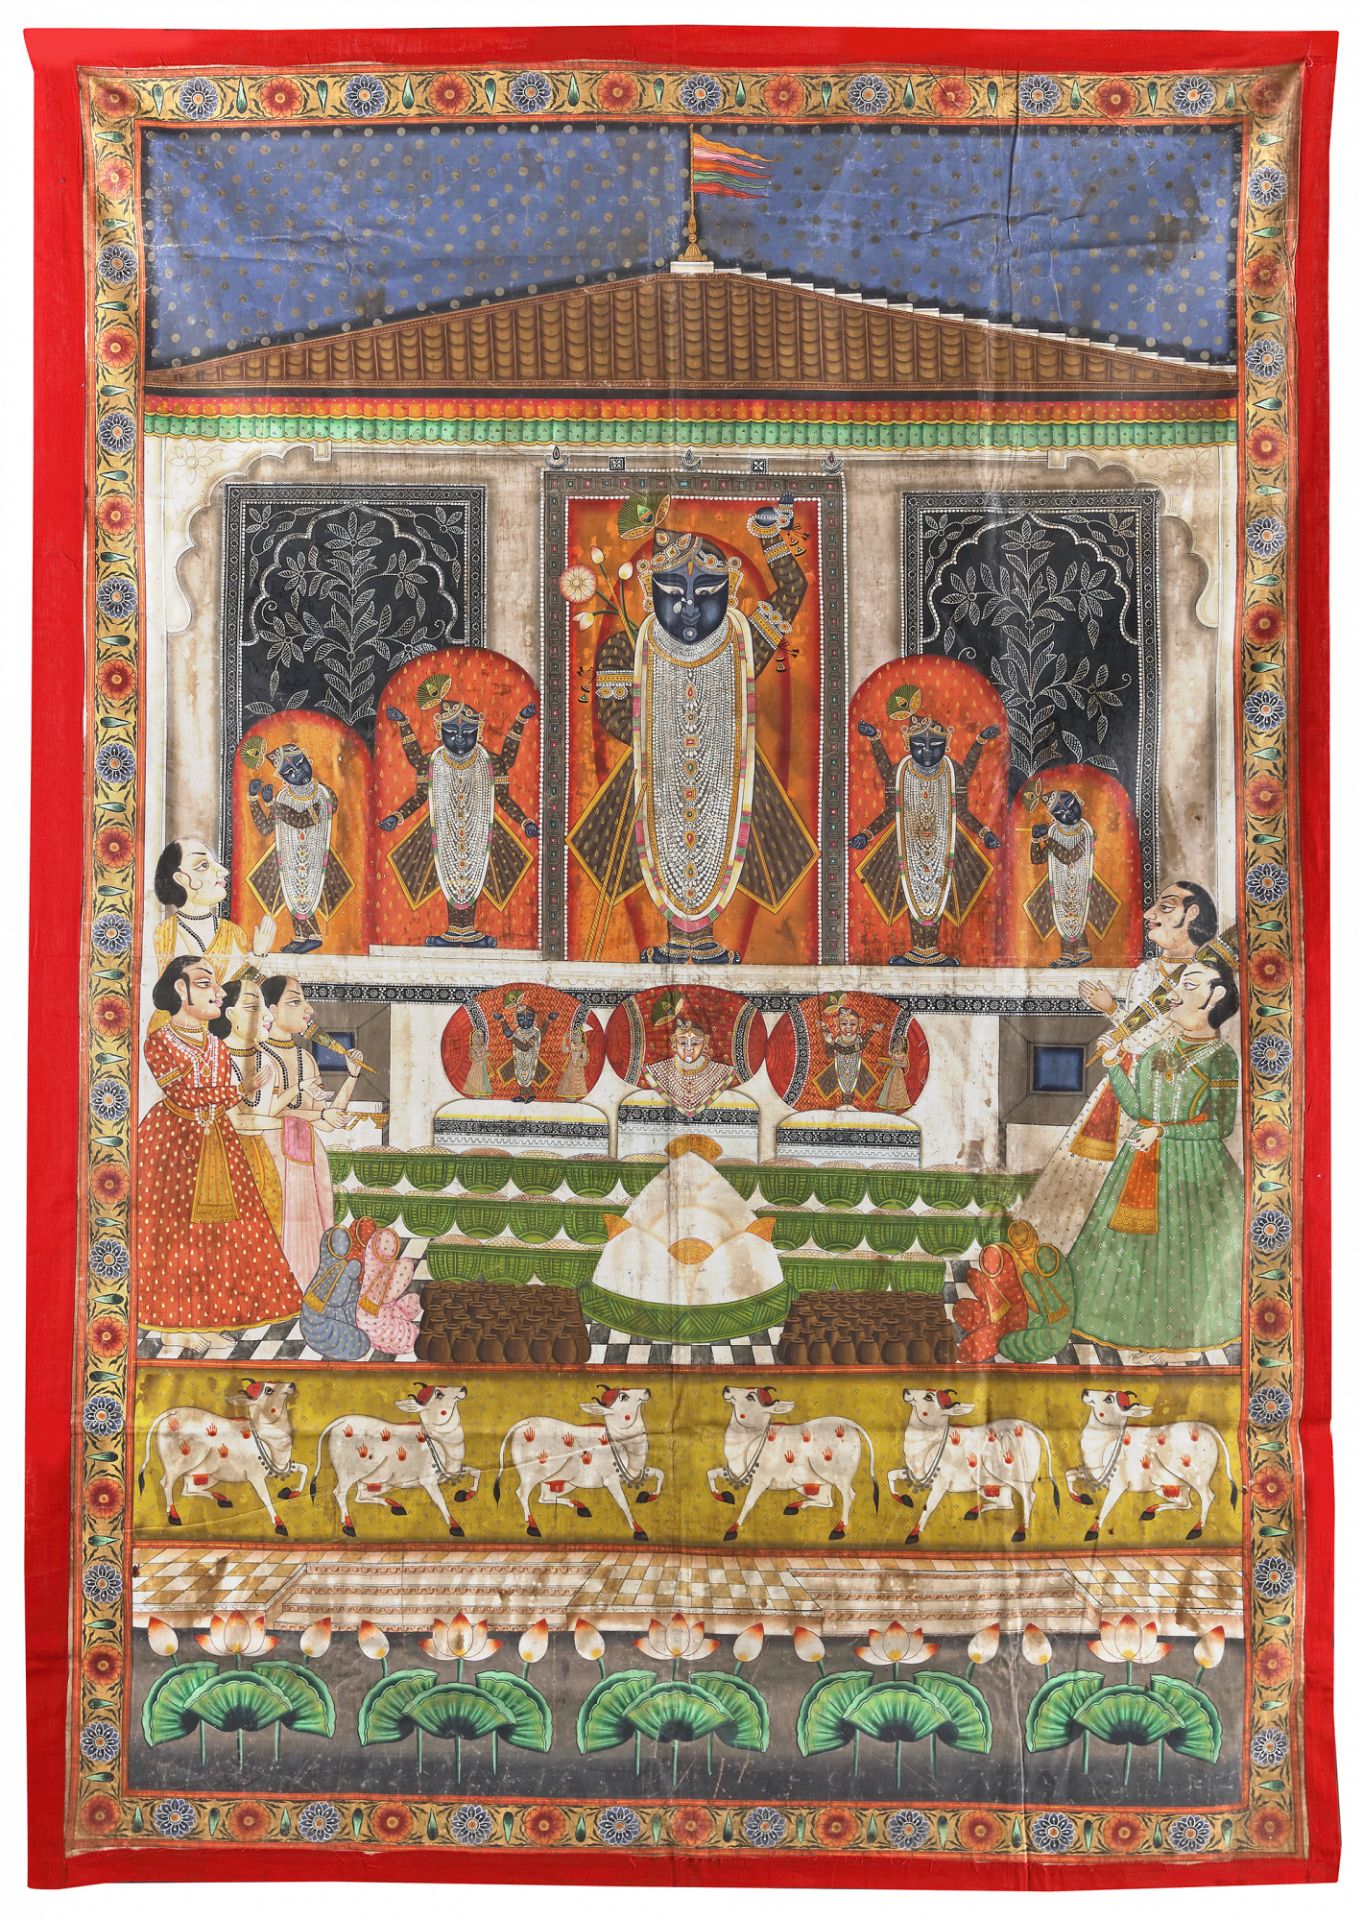 A PICCHVAI OF ANNAKUTA (FESTIVAL OF FIFTY-SIX OFFERINGS), NORTH INDIA, 19TH CENTURY